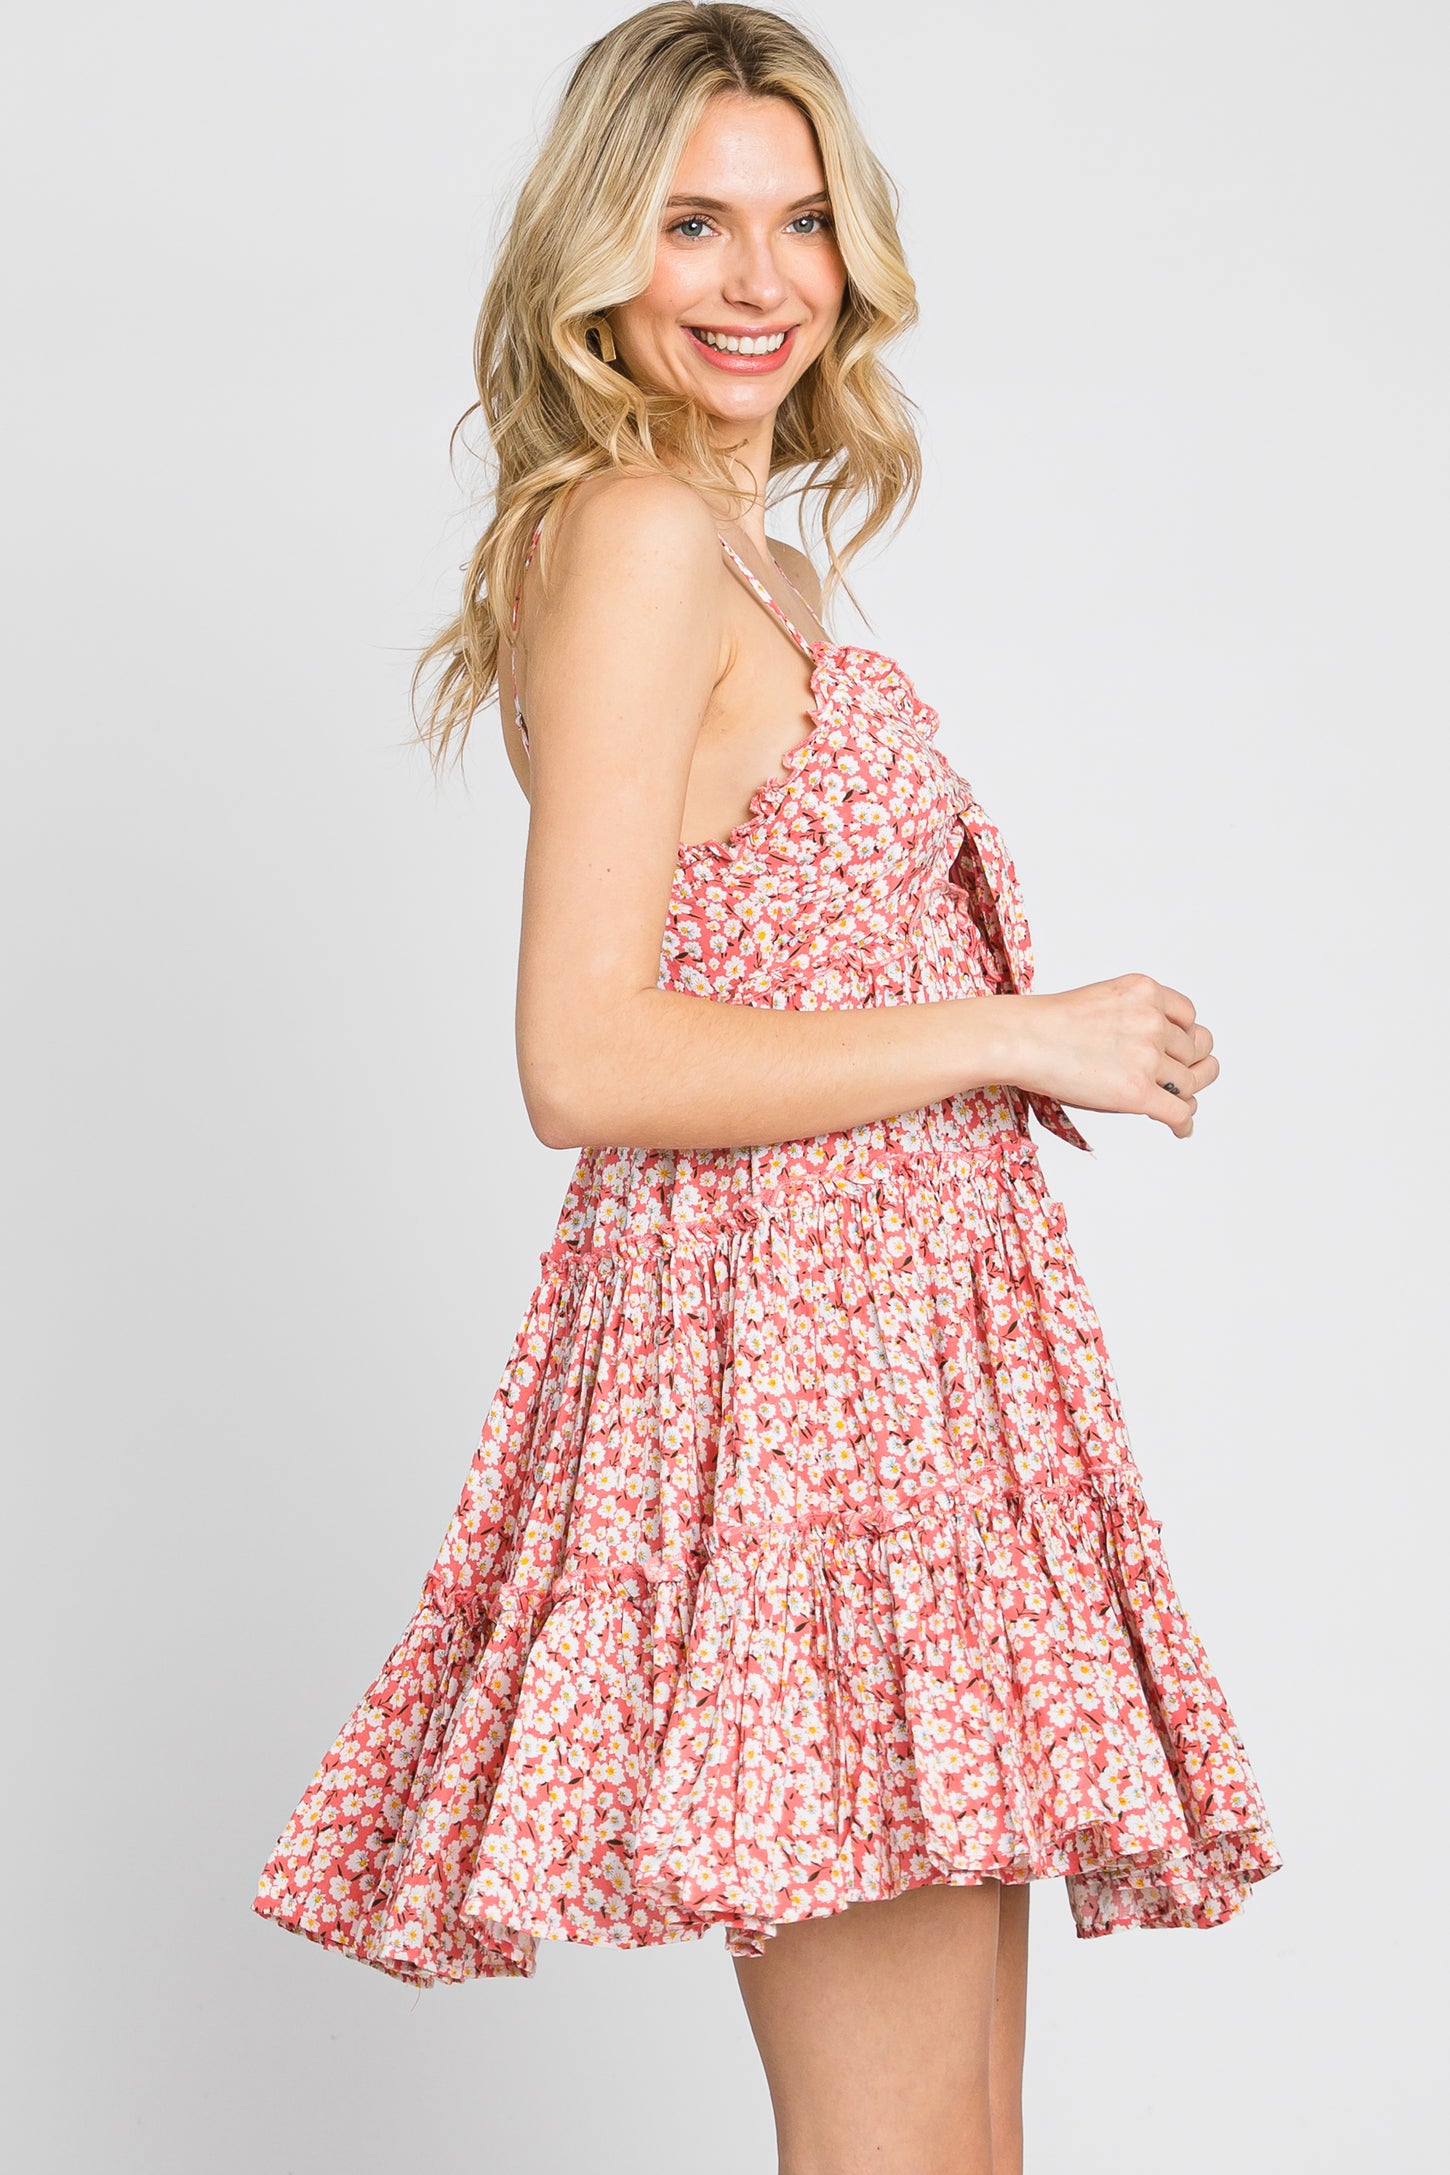 Pink Floral Cut Out Tiered Ruffle Mini Dress